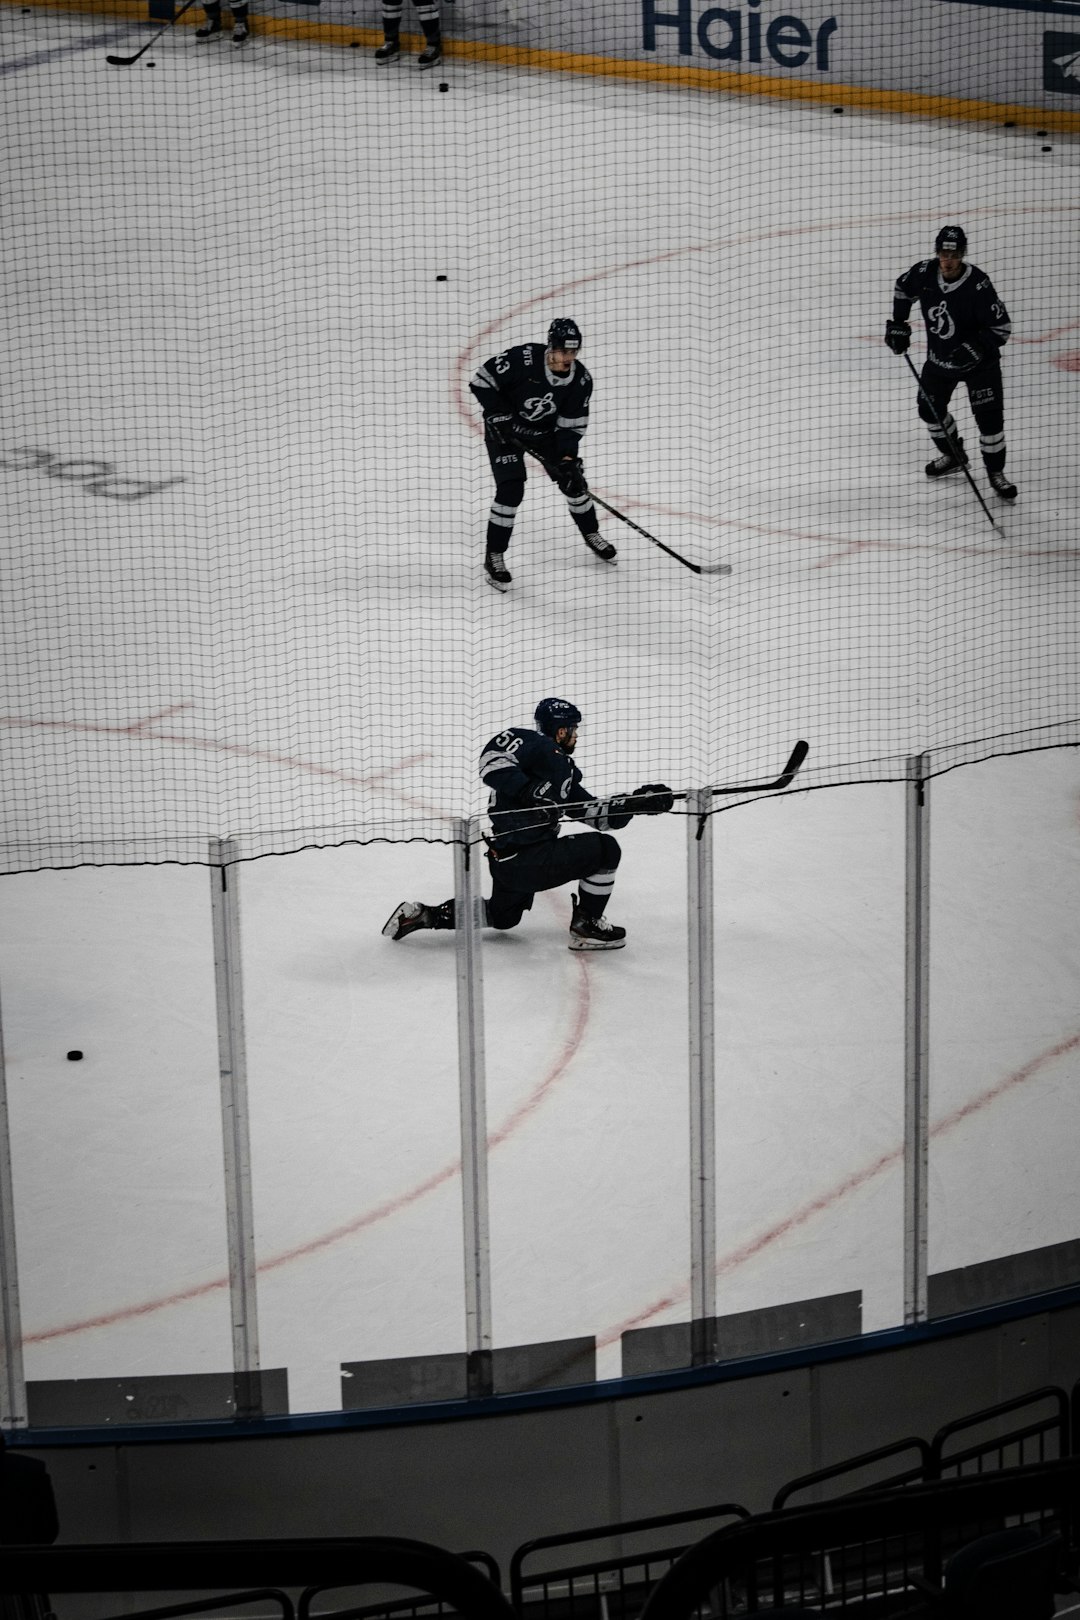 man in black and white ice hockey jersey riding on ice hockey stick